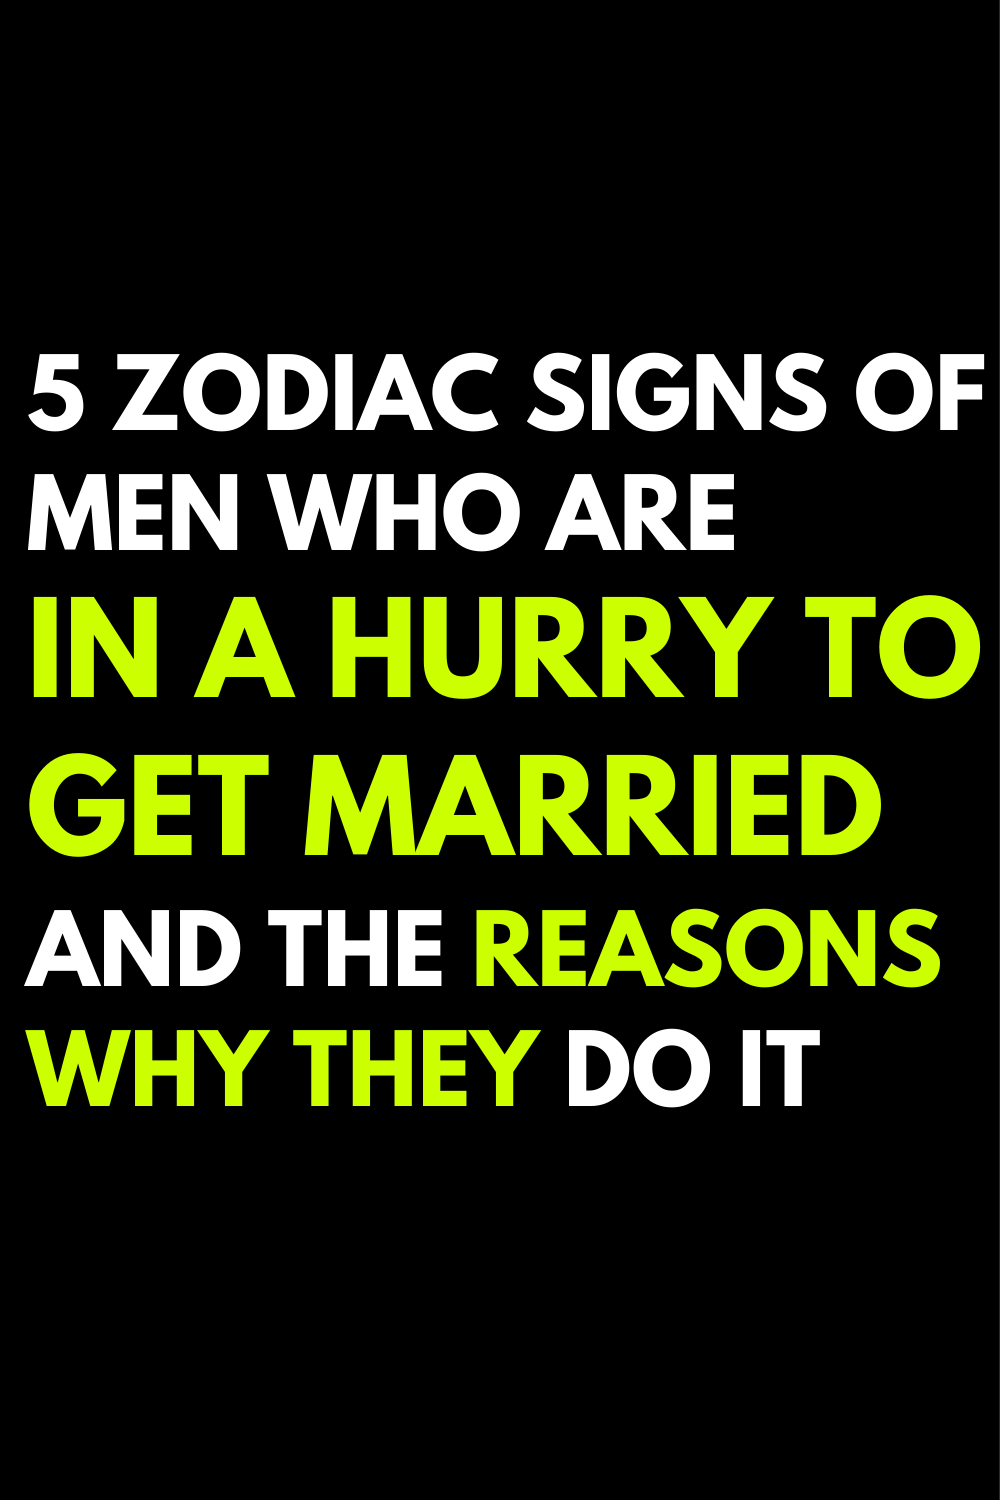 5 zodiac signs of men who are in a hurry to get married and the reasons why they do it